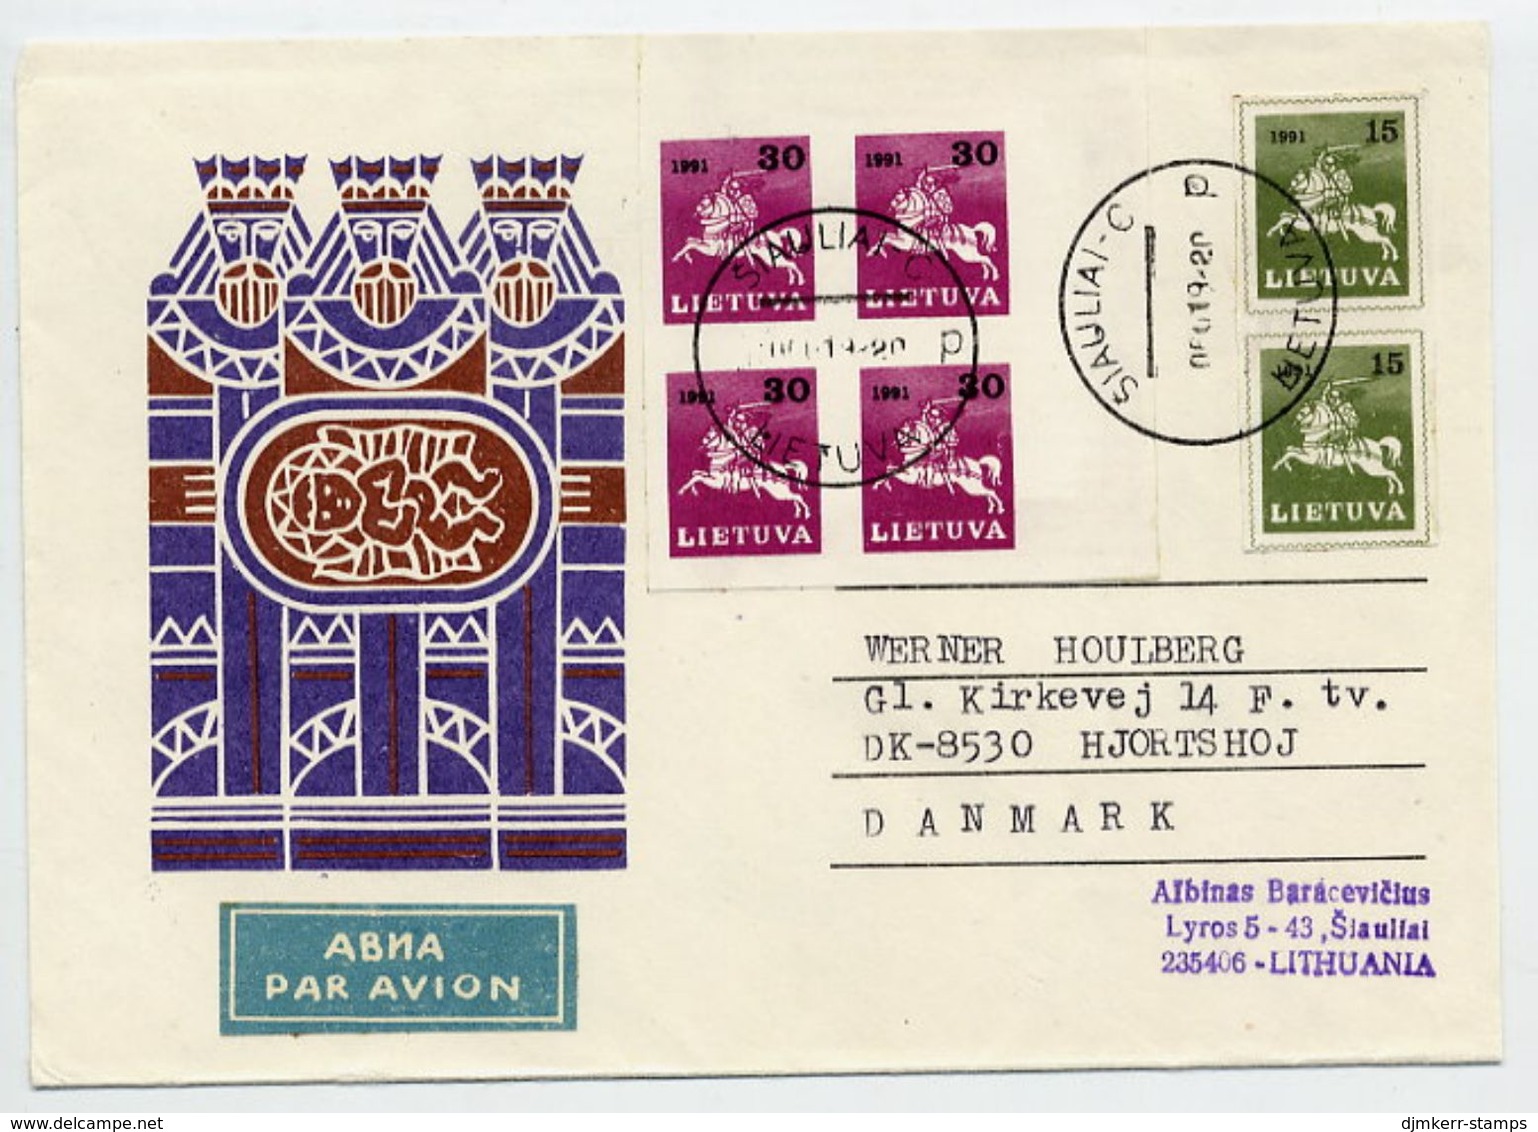 LITHUANIA 1991 Airmail Cover, Used To Denmark.  Michel 472, 481 - Lituania